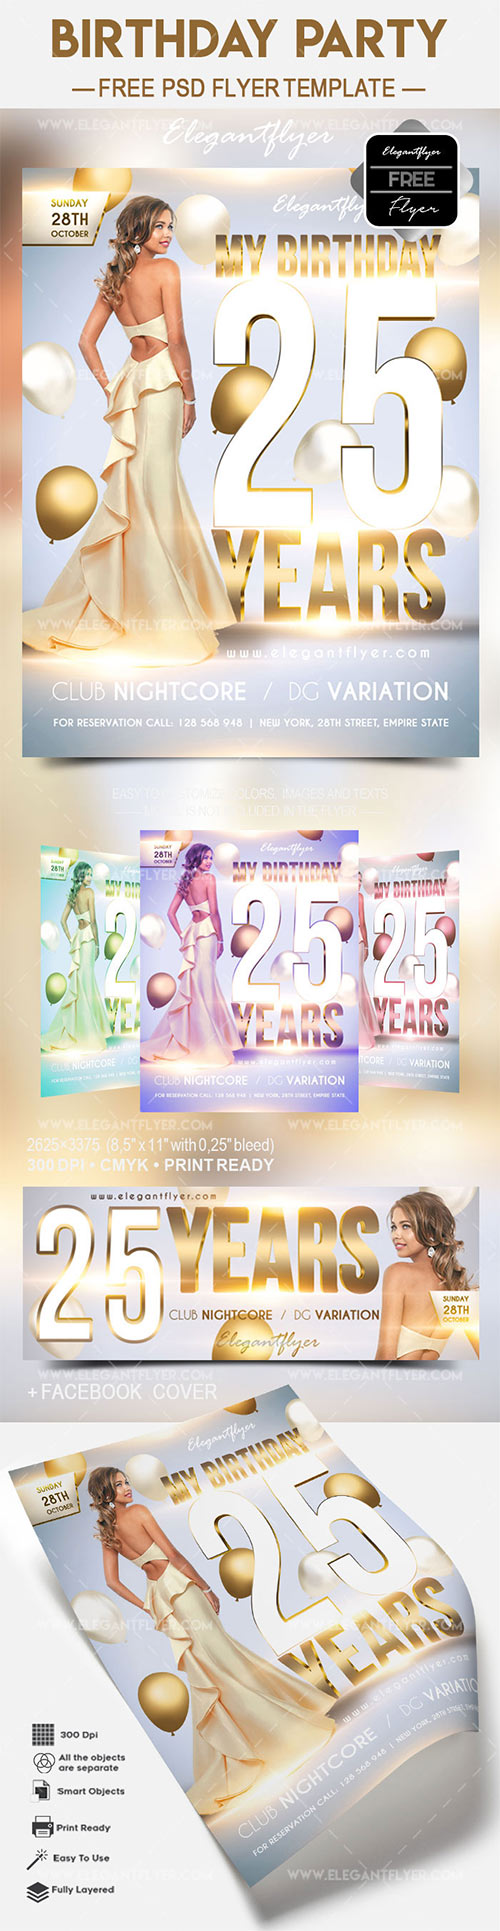 Birthday Party Flyer PSD template + Facebook Cover